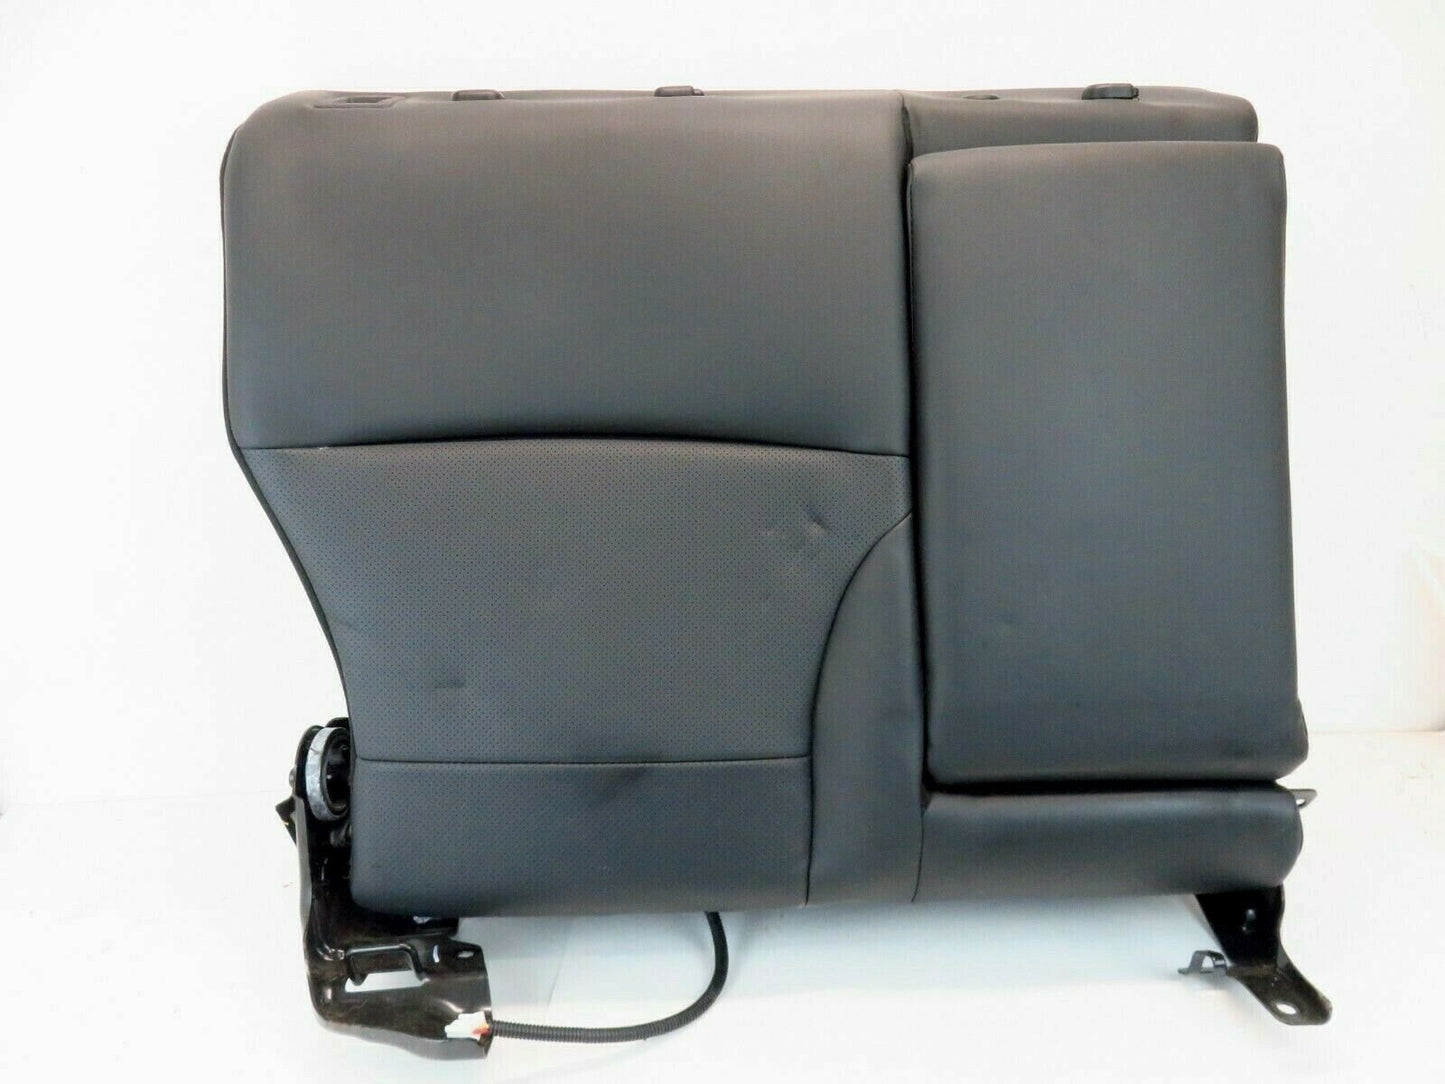 2017 Subaru Outback Rear Seat Upper Cushion Top Back Cupholder Black Leather 17